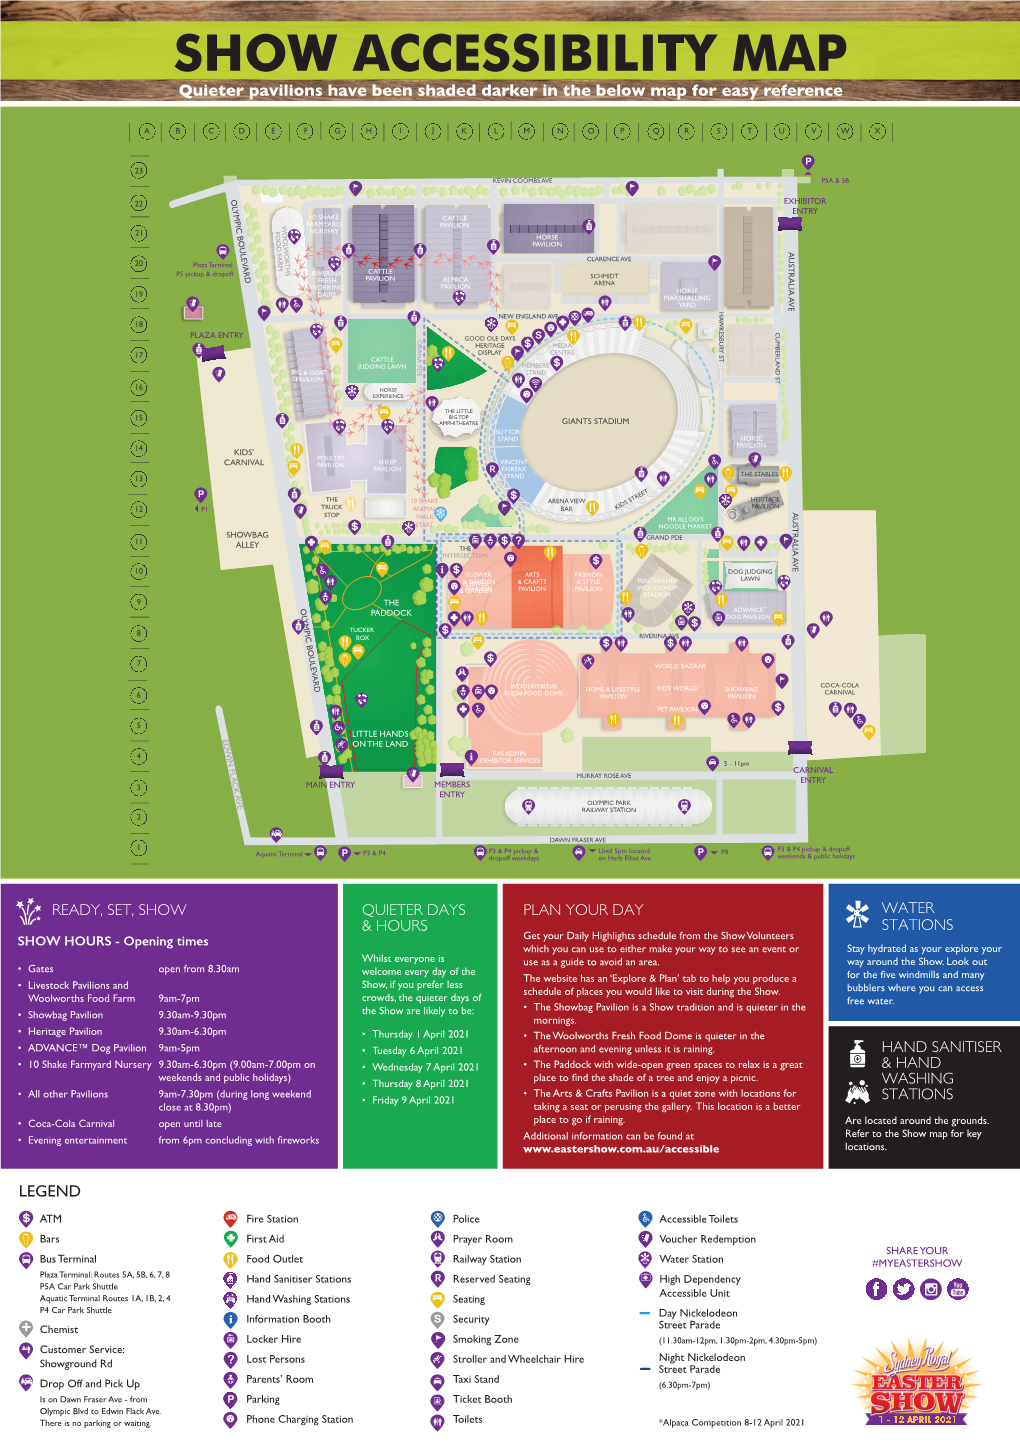 SHOW ACCESSIBILITY MAP Quieter Pavilions Have Been Shaded Darker in the Below Map for Easy Reference